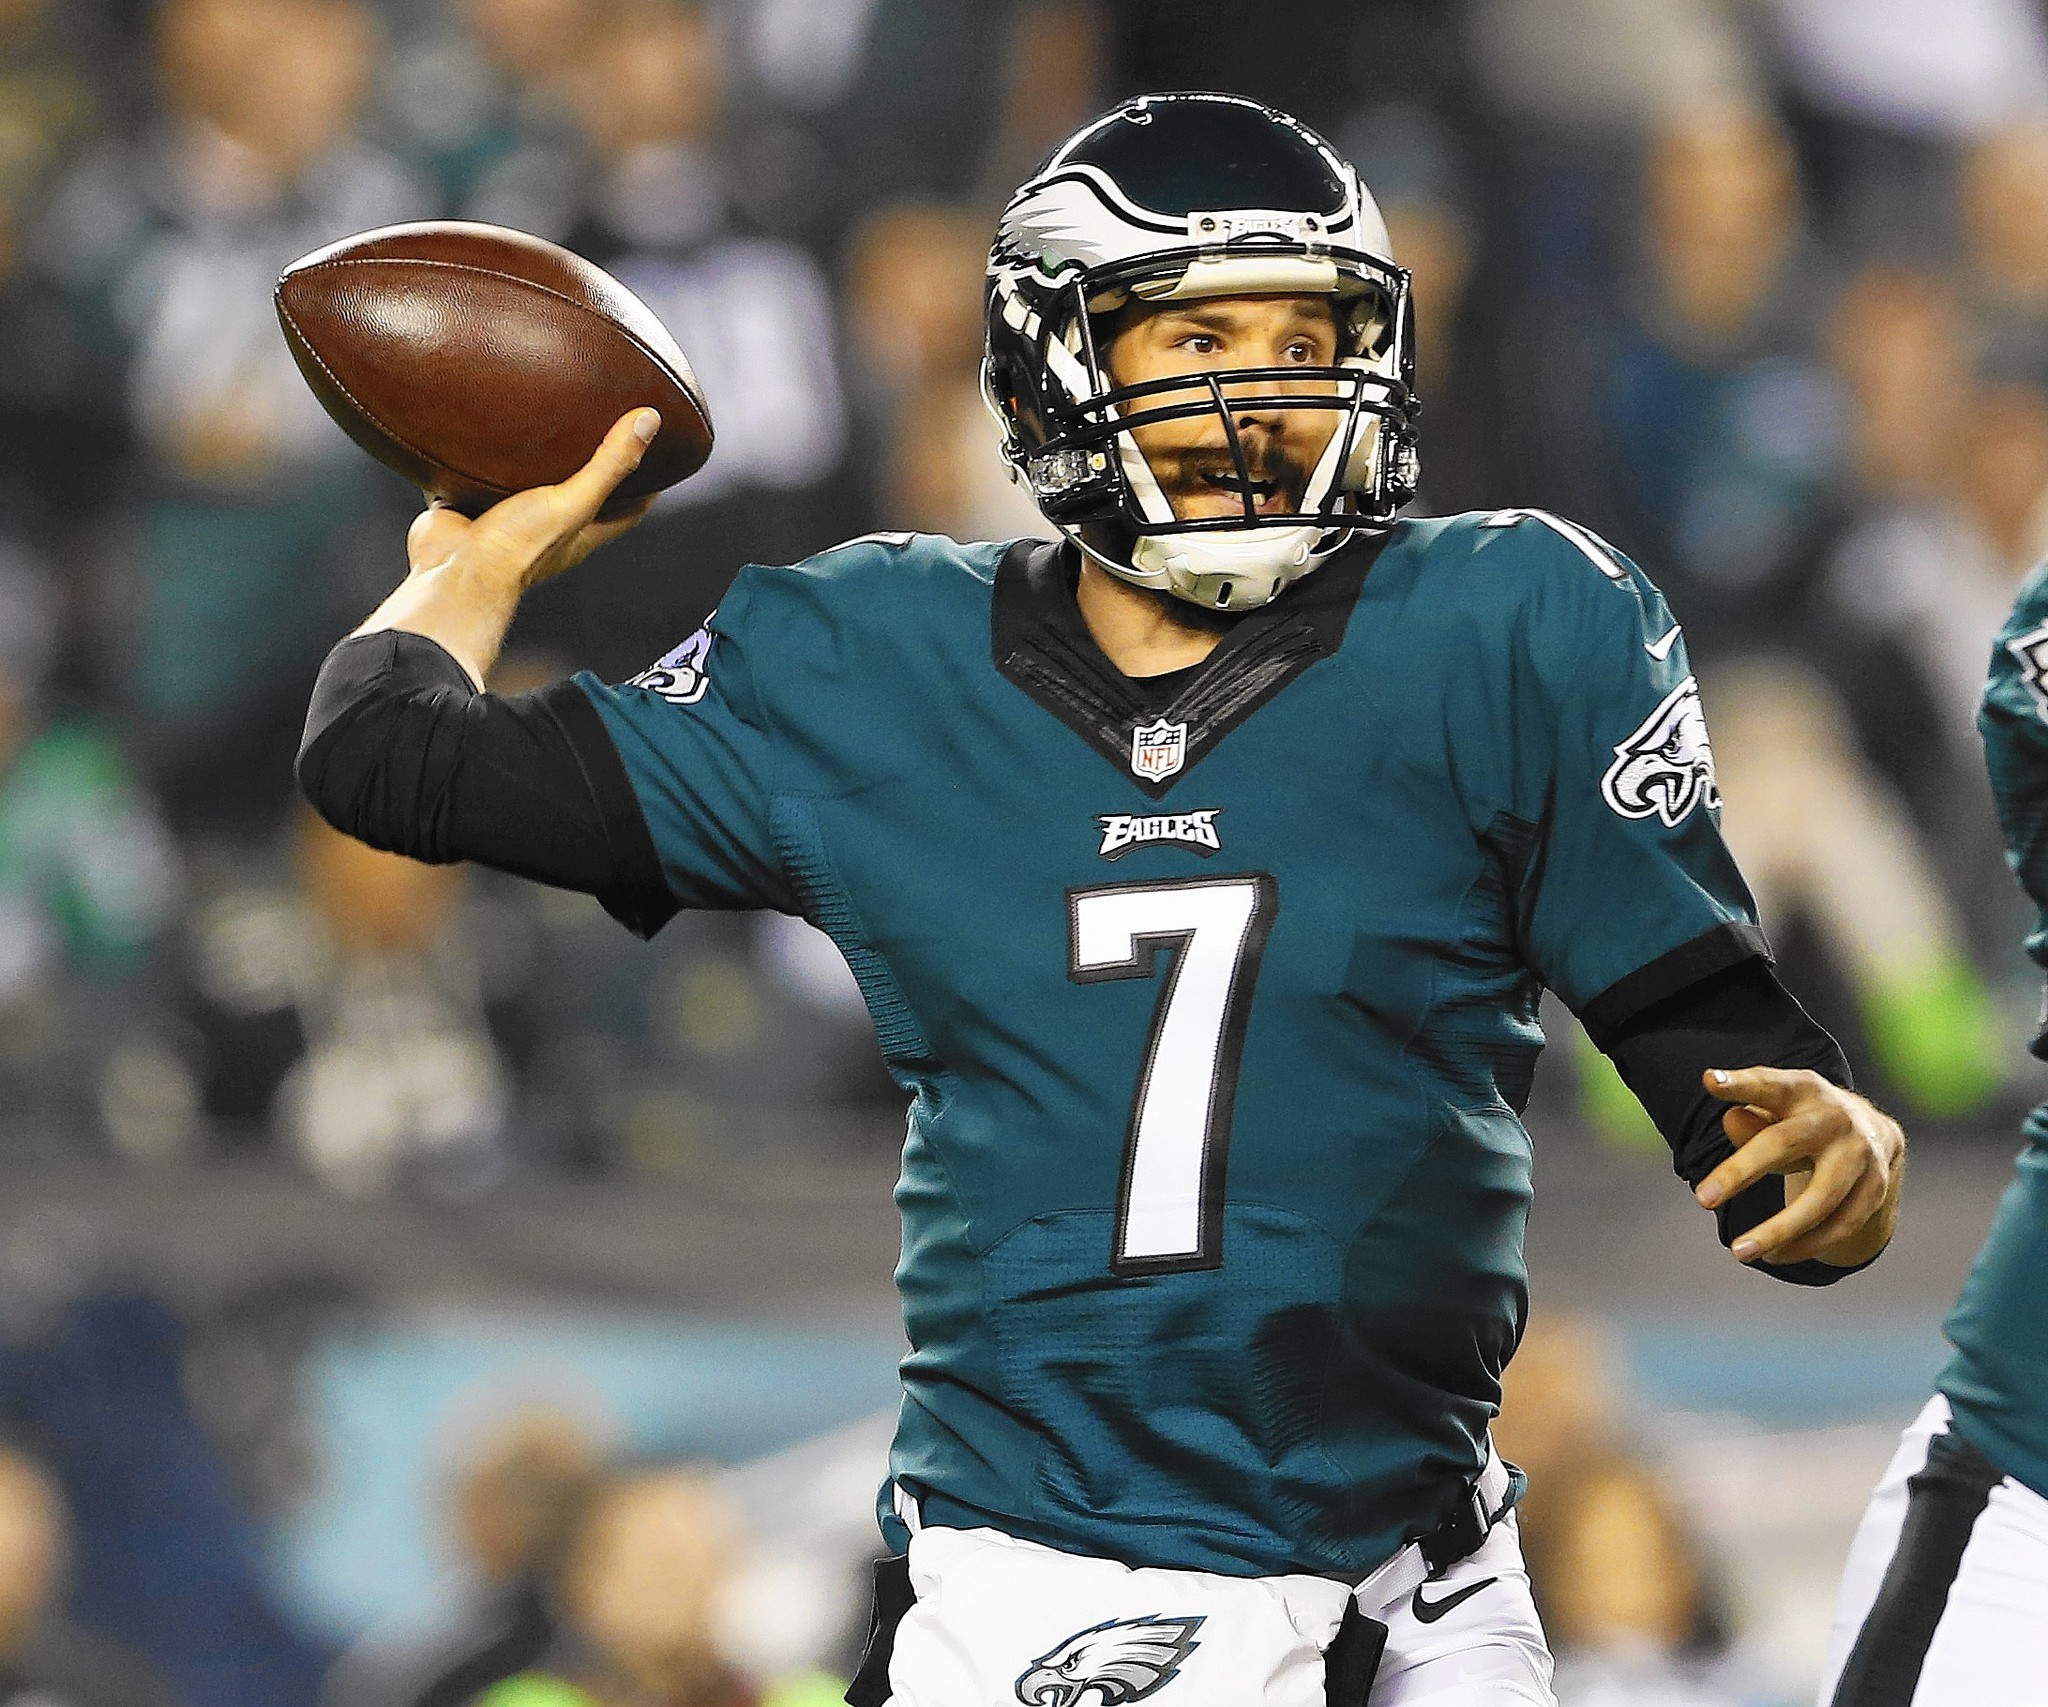 Is Sam Bradford the long-term answer at quarterback for the Eagles? - The Morning Call